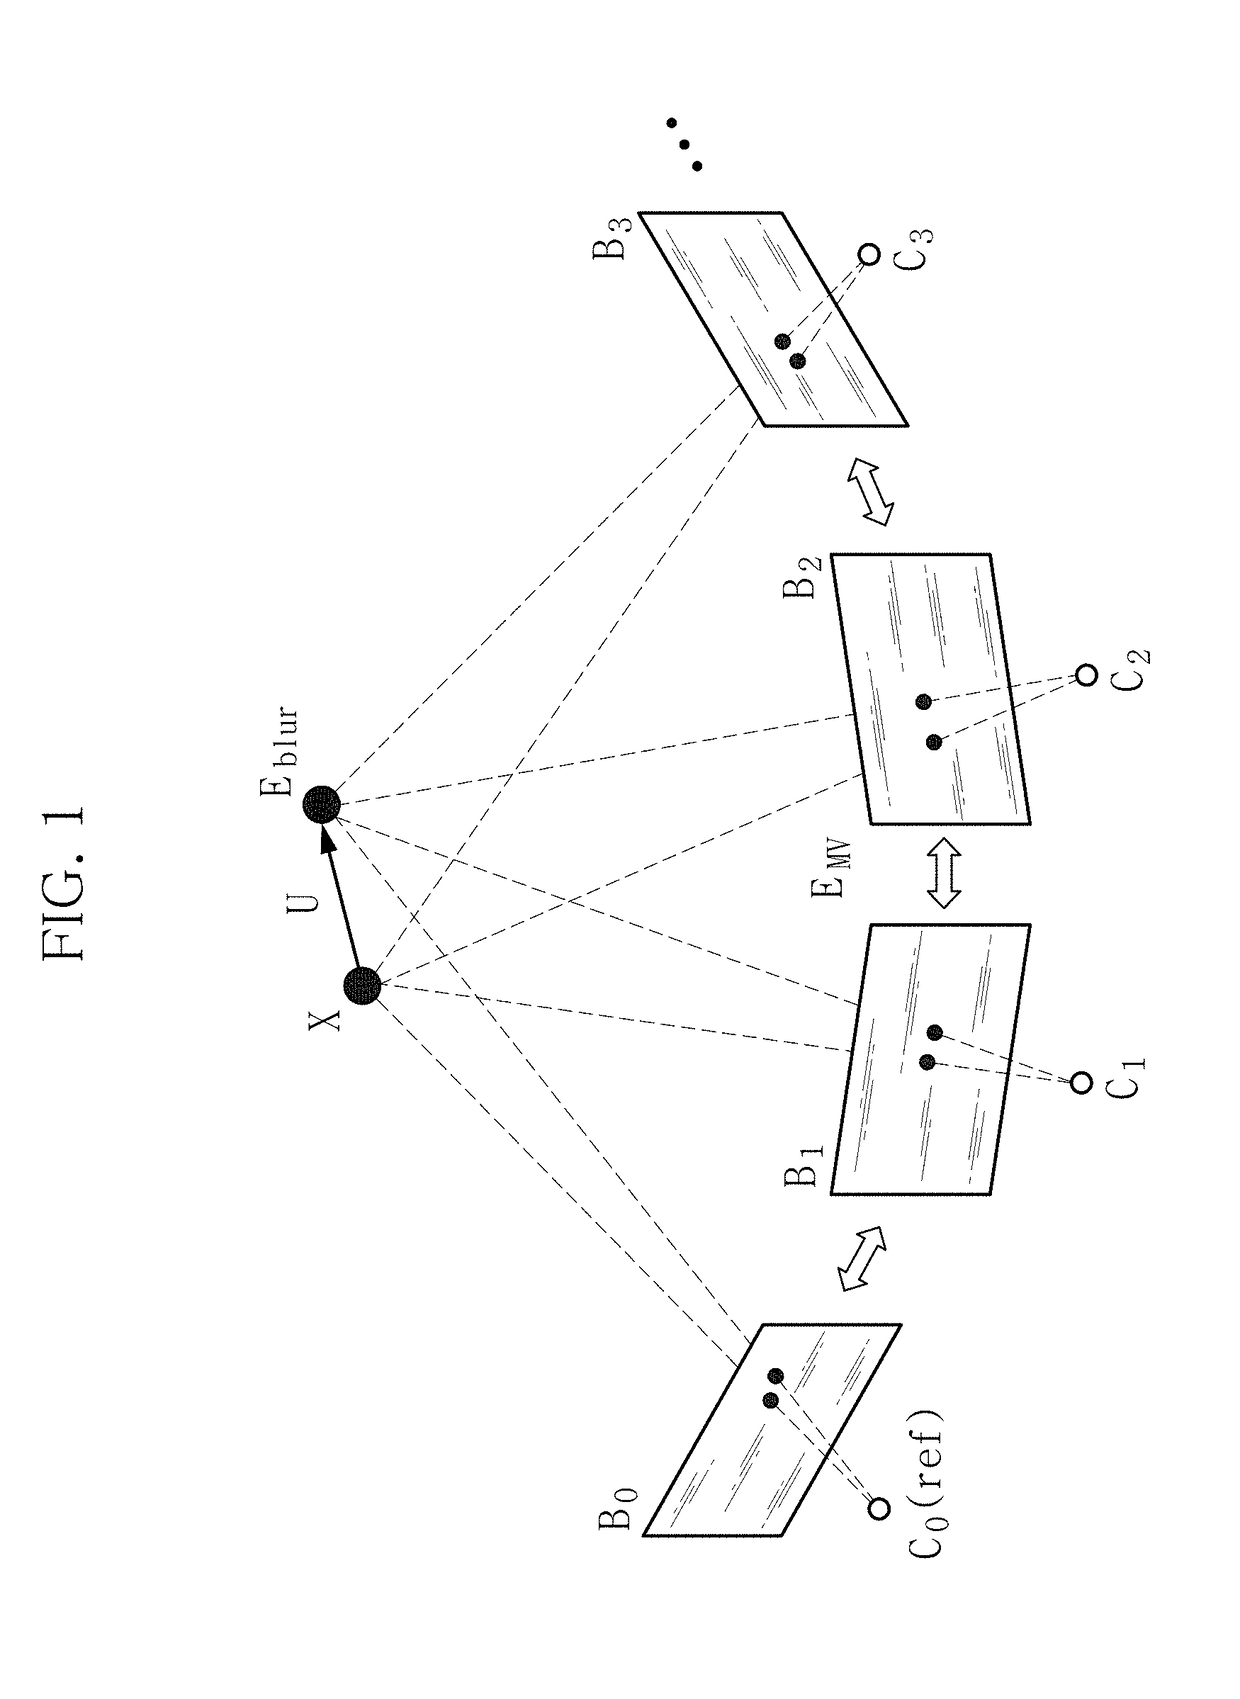 Method of multi-view deblurring for 3D shape reconstruction, recording medium and device for performing the method